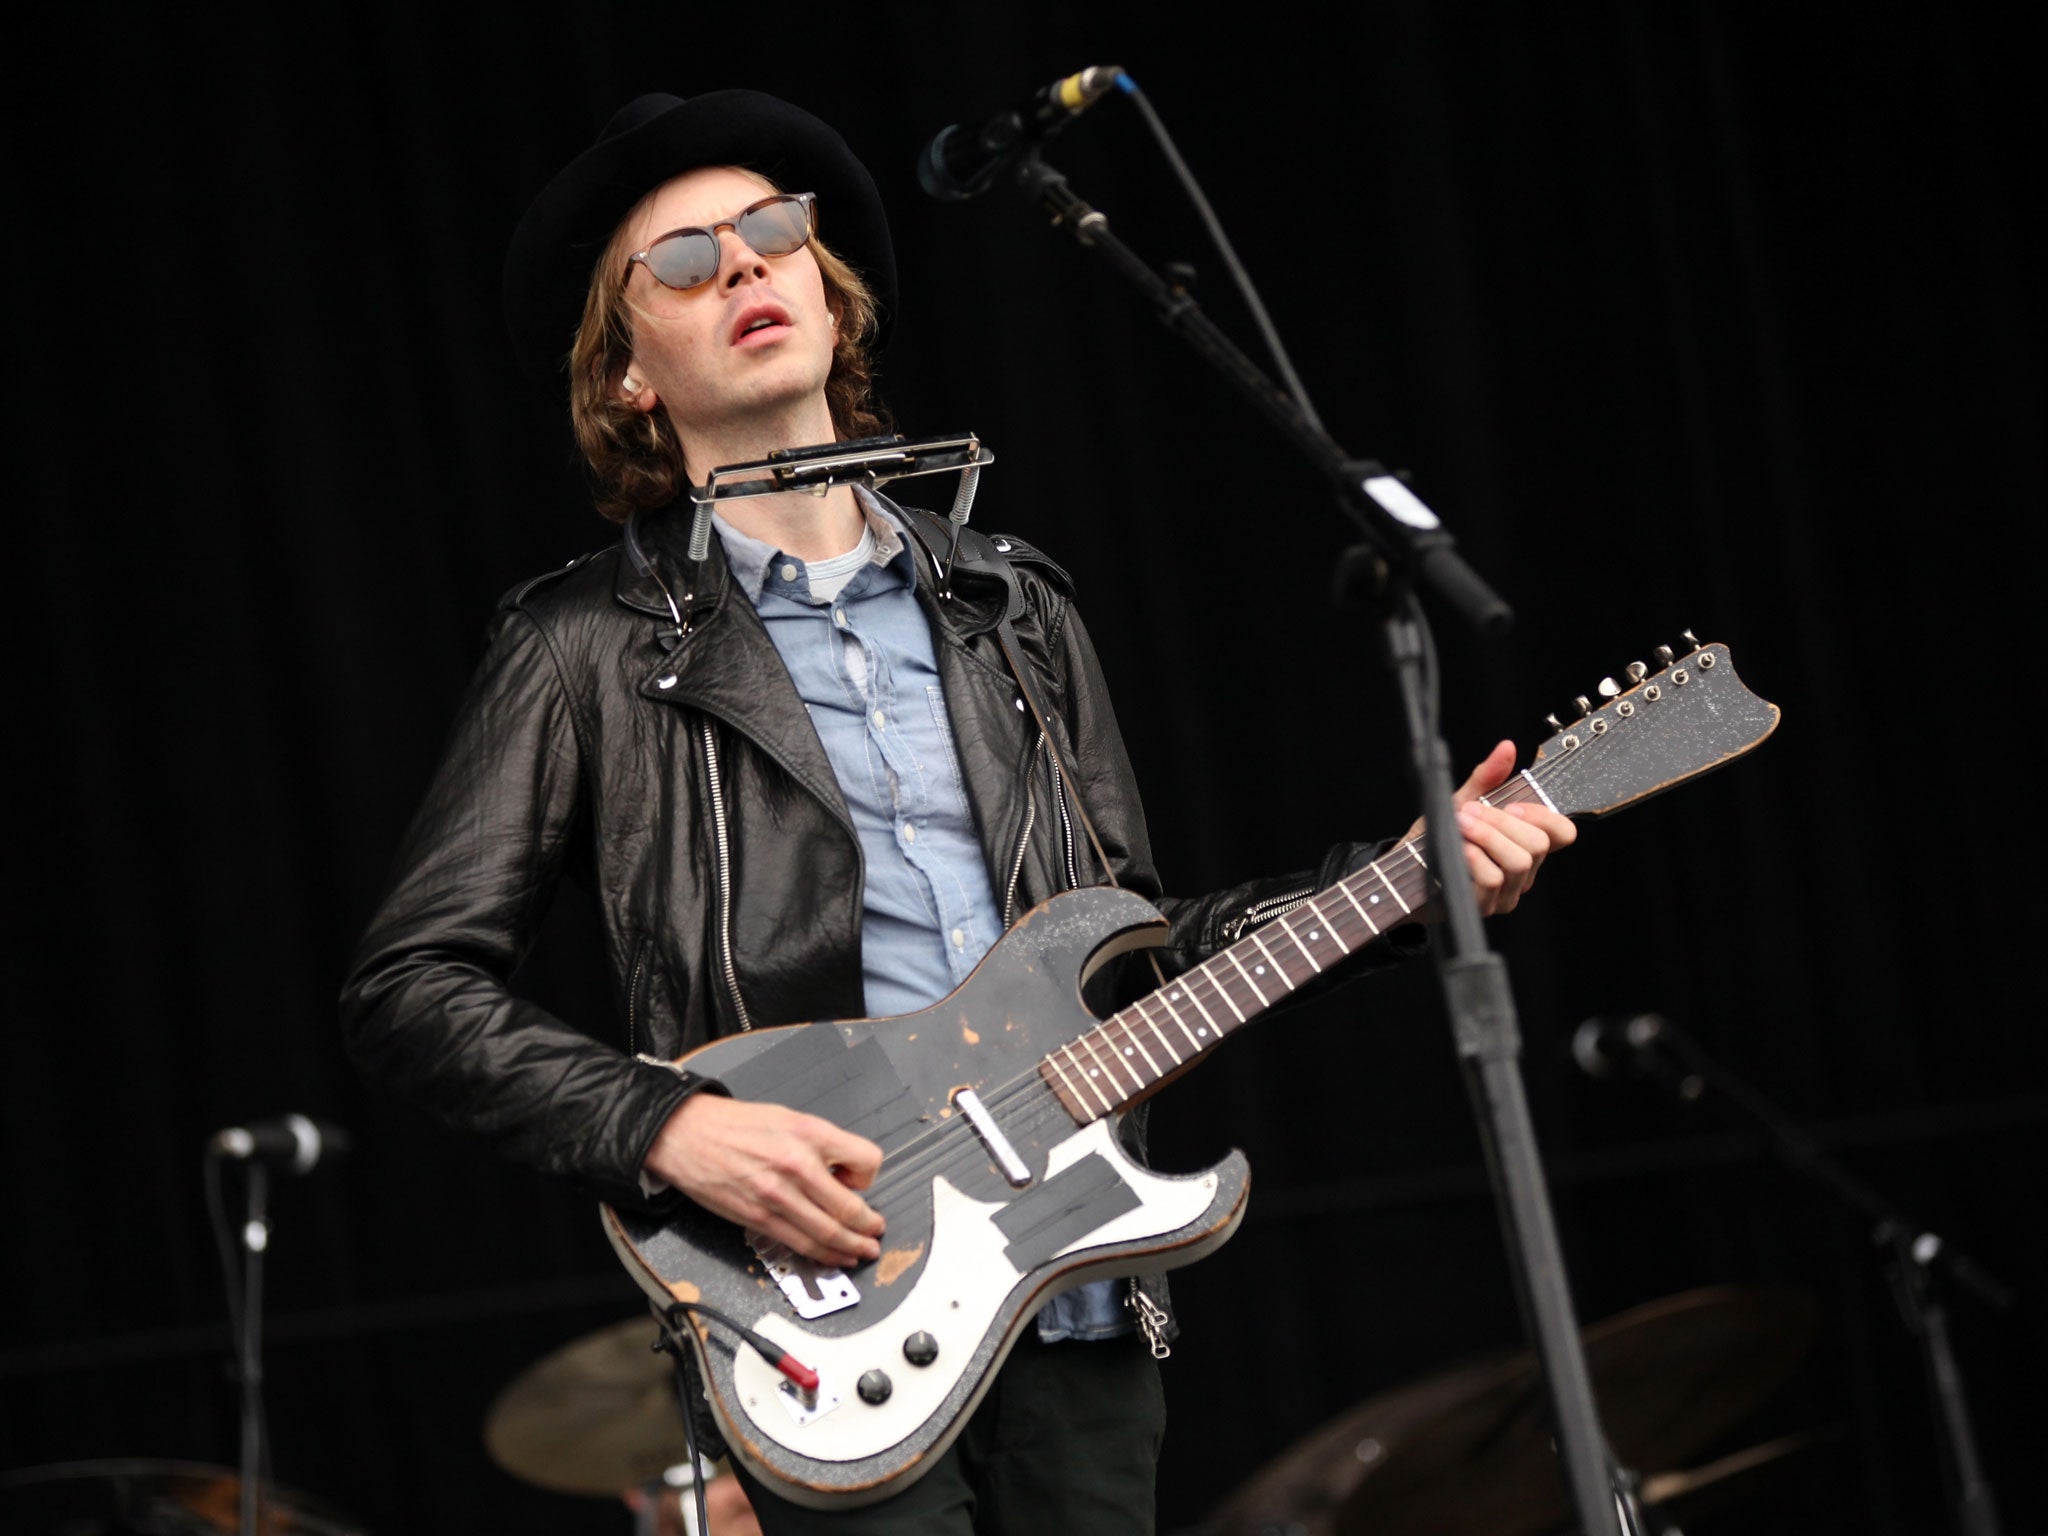 Beck is due to headline Festival No 6 this summer